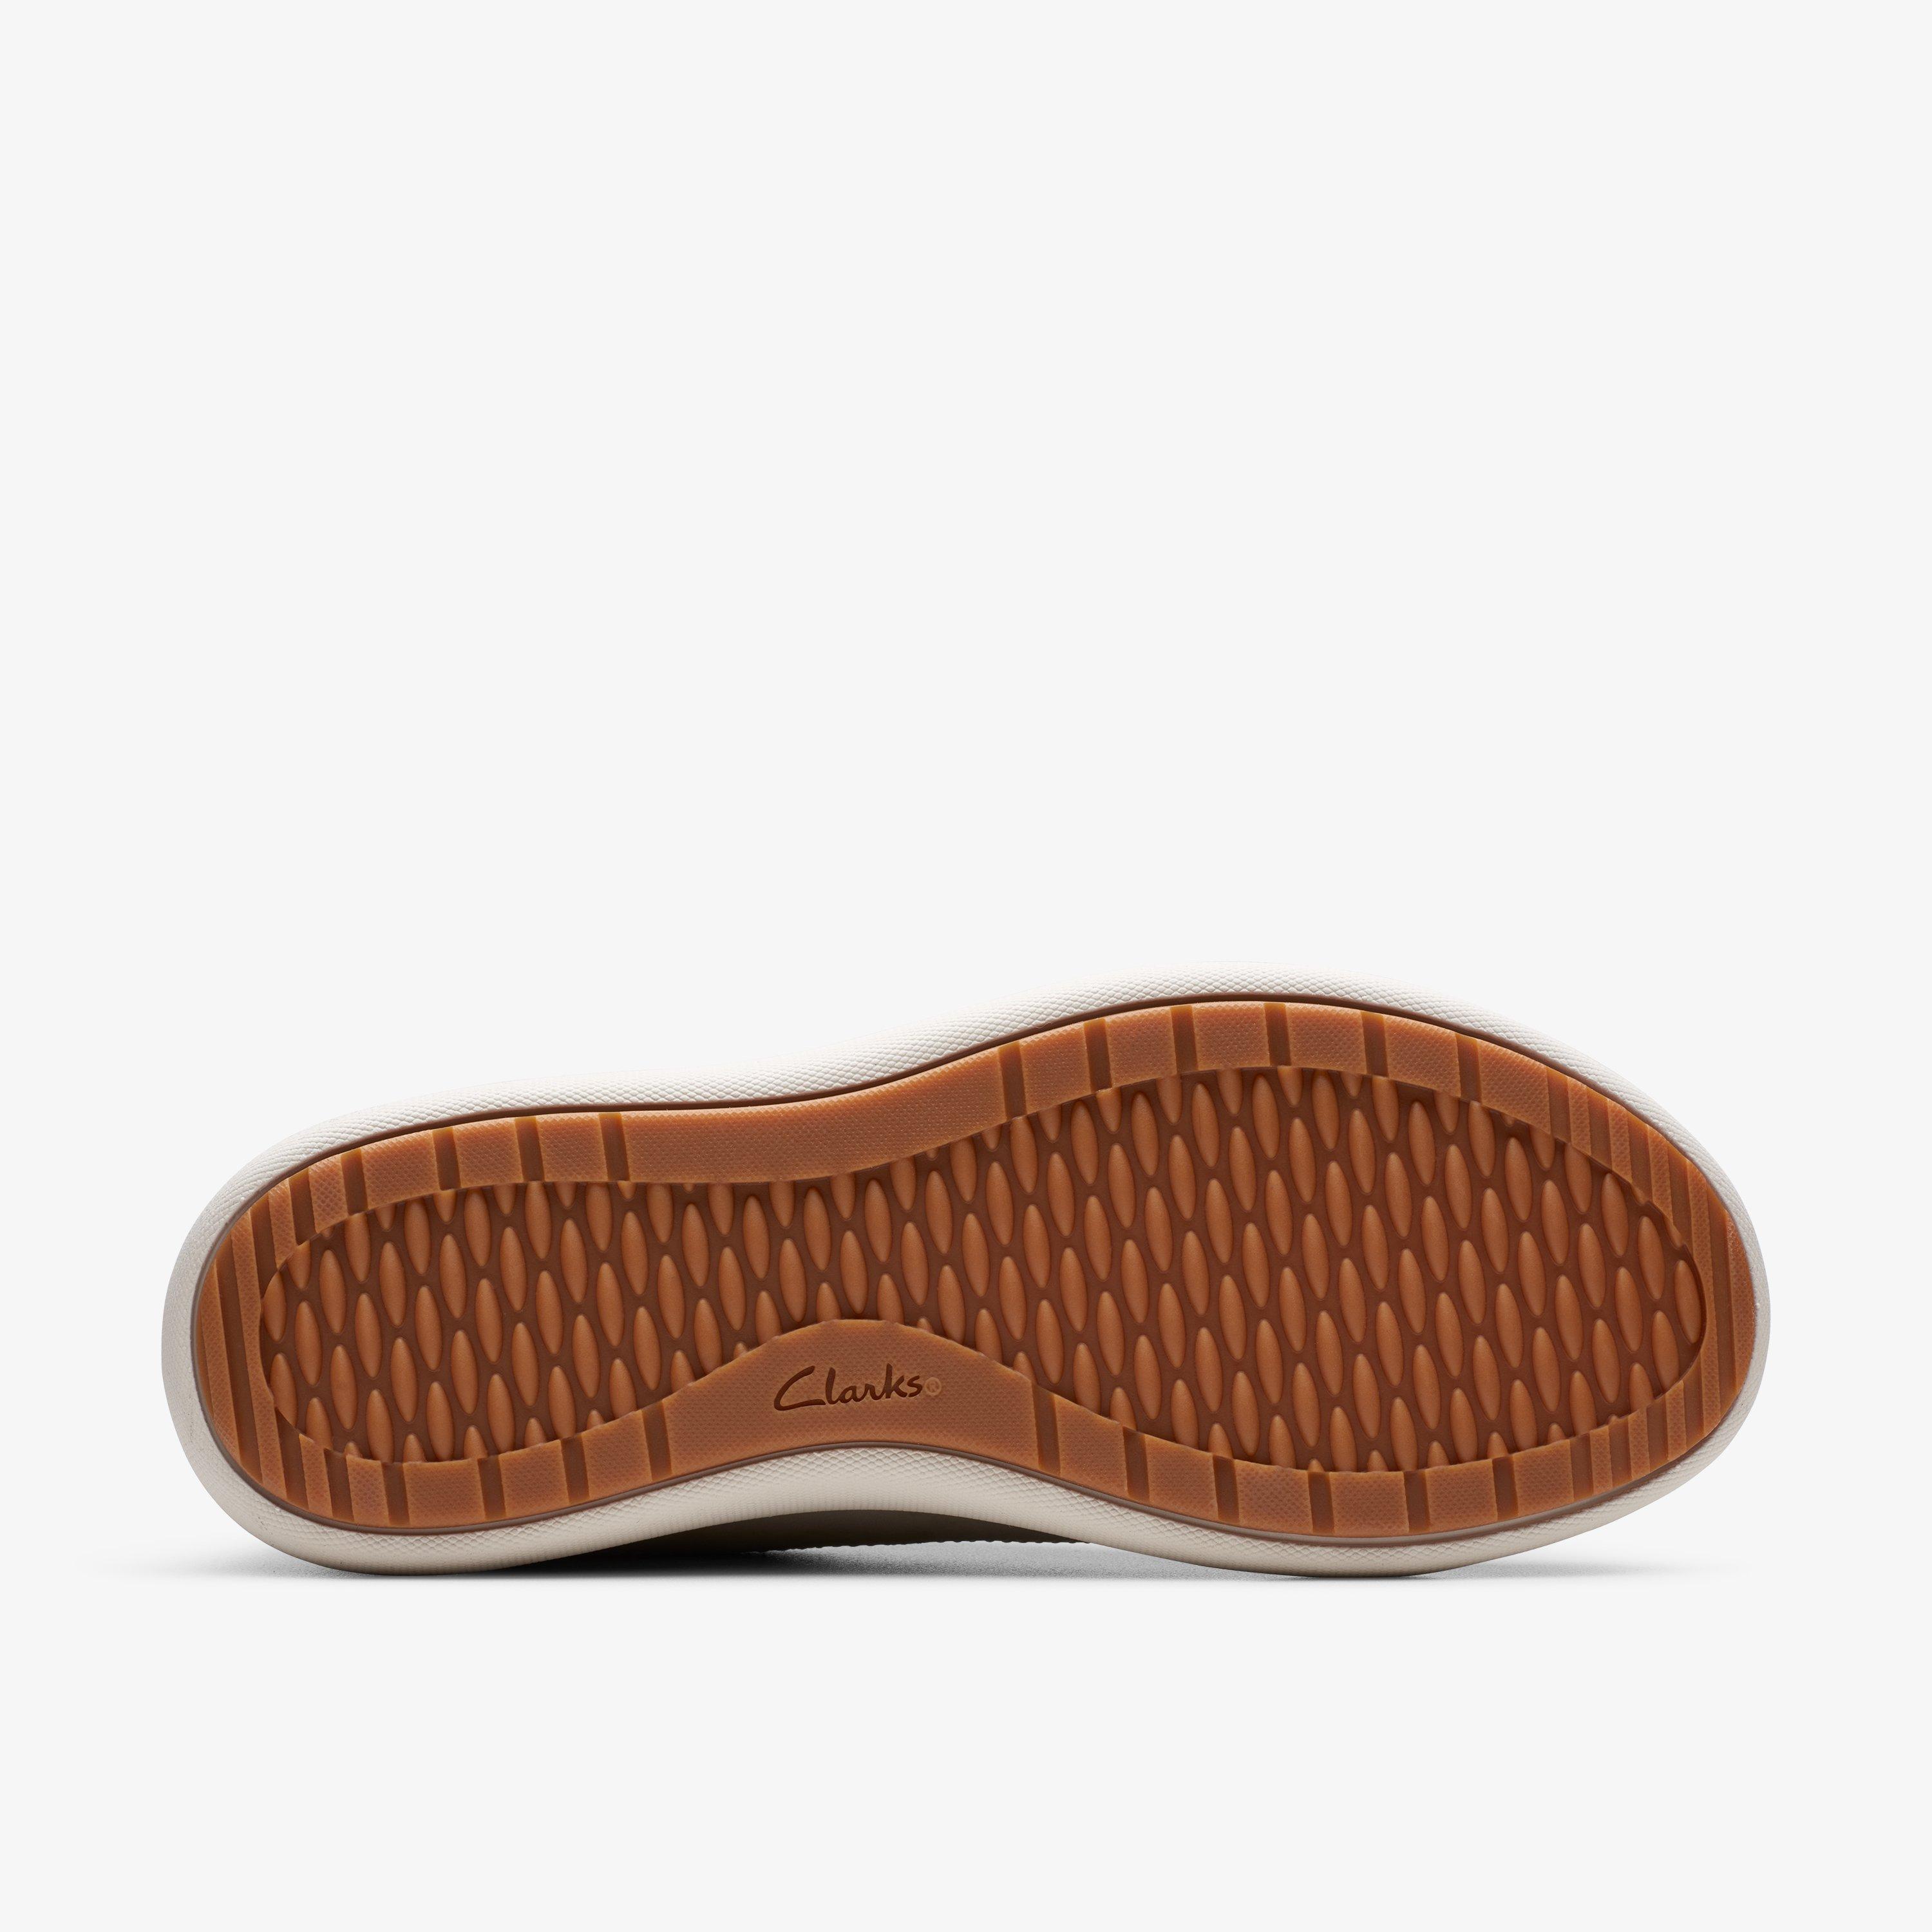 WOMENS Nalle Lace Stone Nubuck Sneakers | Clarks US